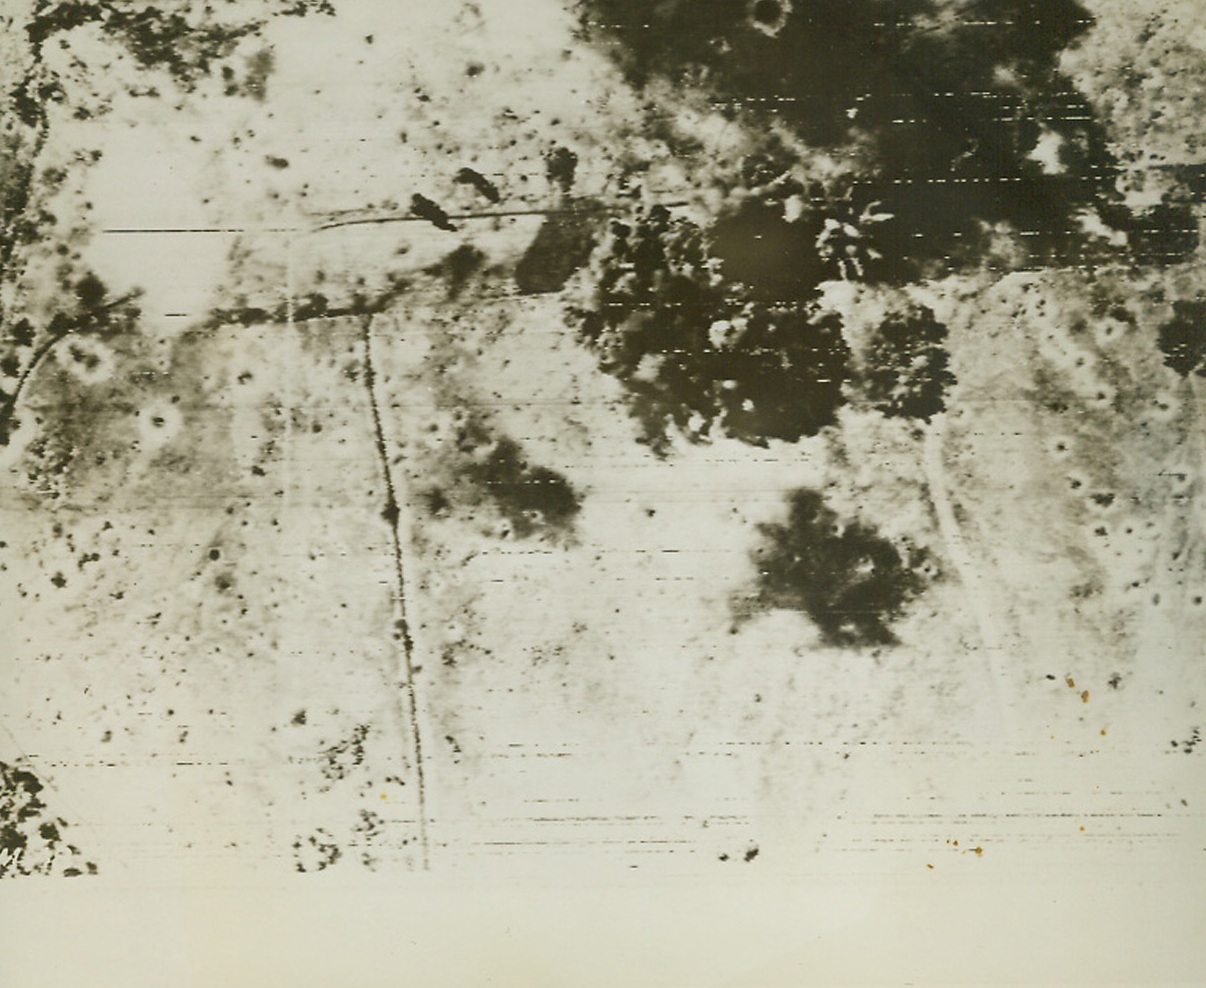 Yanks Wreck Cape Gloucester Field, 12/28/1943. This photo, flashed to the United States by radiotelephoto, shows bombs from U.S. B-24 Liberator and B-25 Mitchell Bombers, exploding on the Jap airfield at Cape Gloucester. The field is shown pitted with shell craters from almost daily bombing by Allied planes since Dec. 1st. In upper right, bombs burst on Nip planes which were trapped on the ground. These raids were in preparation for landings by American Marines who, it was announced today, had made their second landing in the Cape Gloucester area. Credit: U.S. Signal Corps Radiotelephoto from ACME;